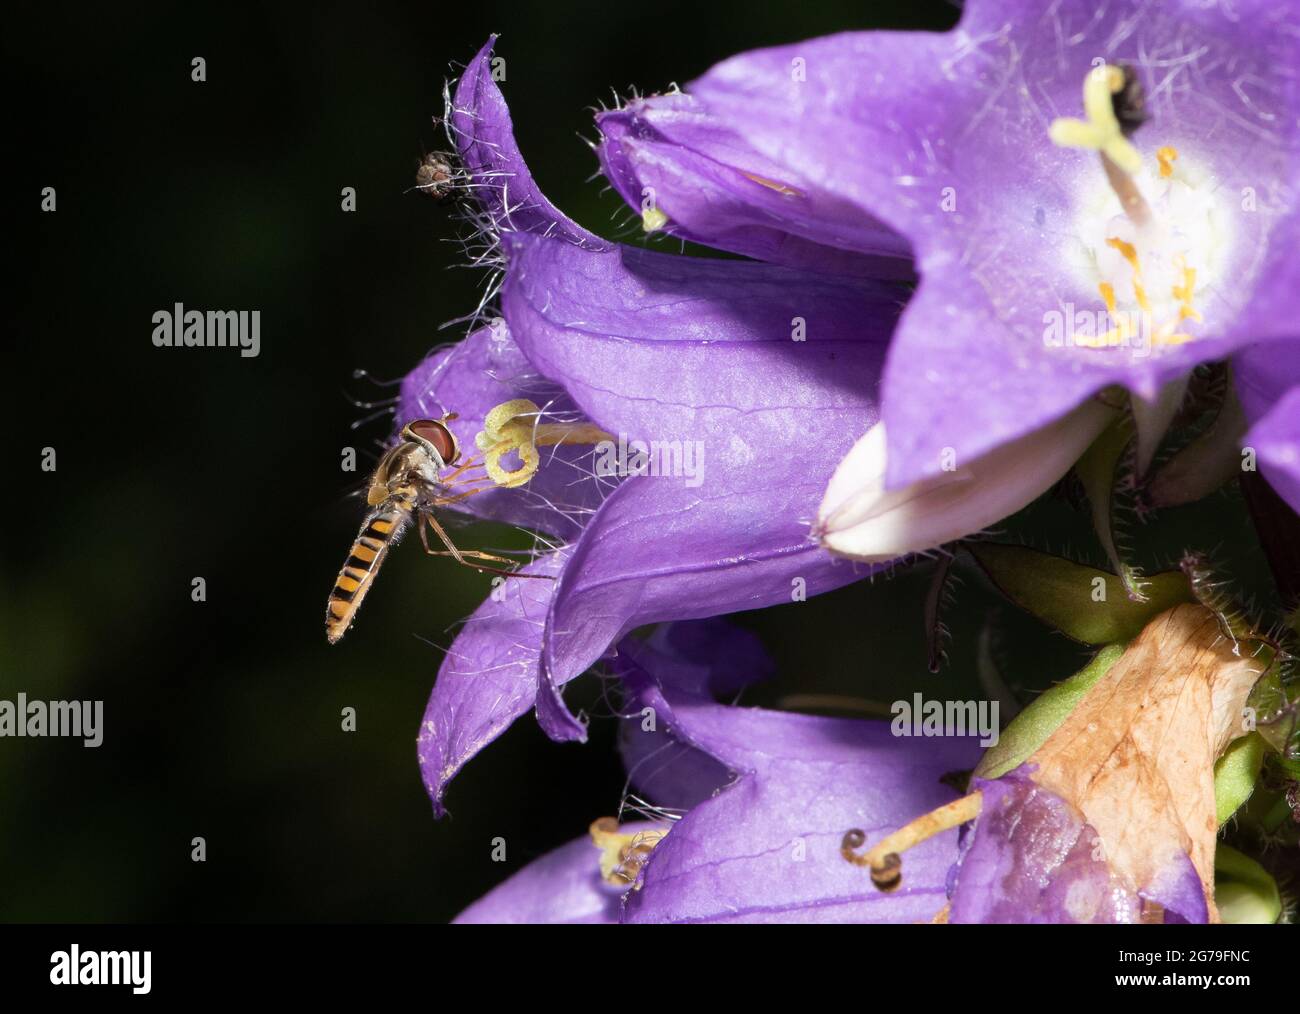 Preston, Lancashire, UK. 12th July, 2021. A Marmalade hover fly on bellflowers, Chipping, Preston, Lancashire, UK. Most hover flies are important plant pollinators and pest controllers. Credit: John Eveson/Alamy Live News Stock Photo